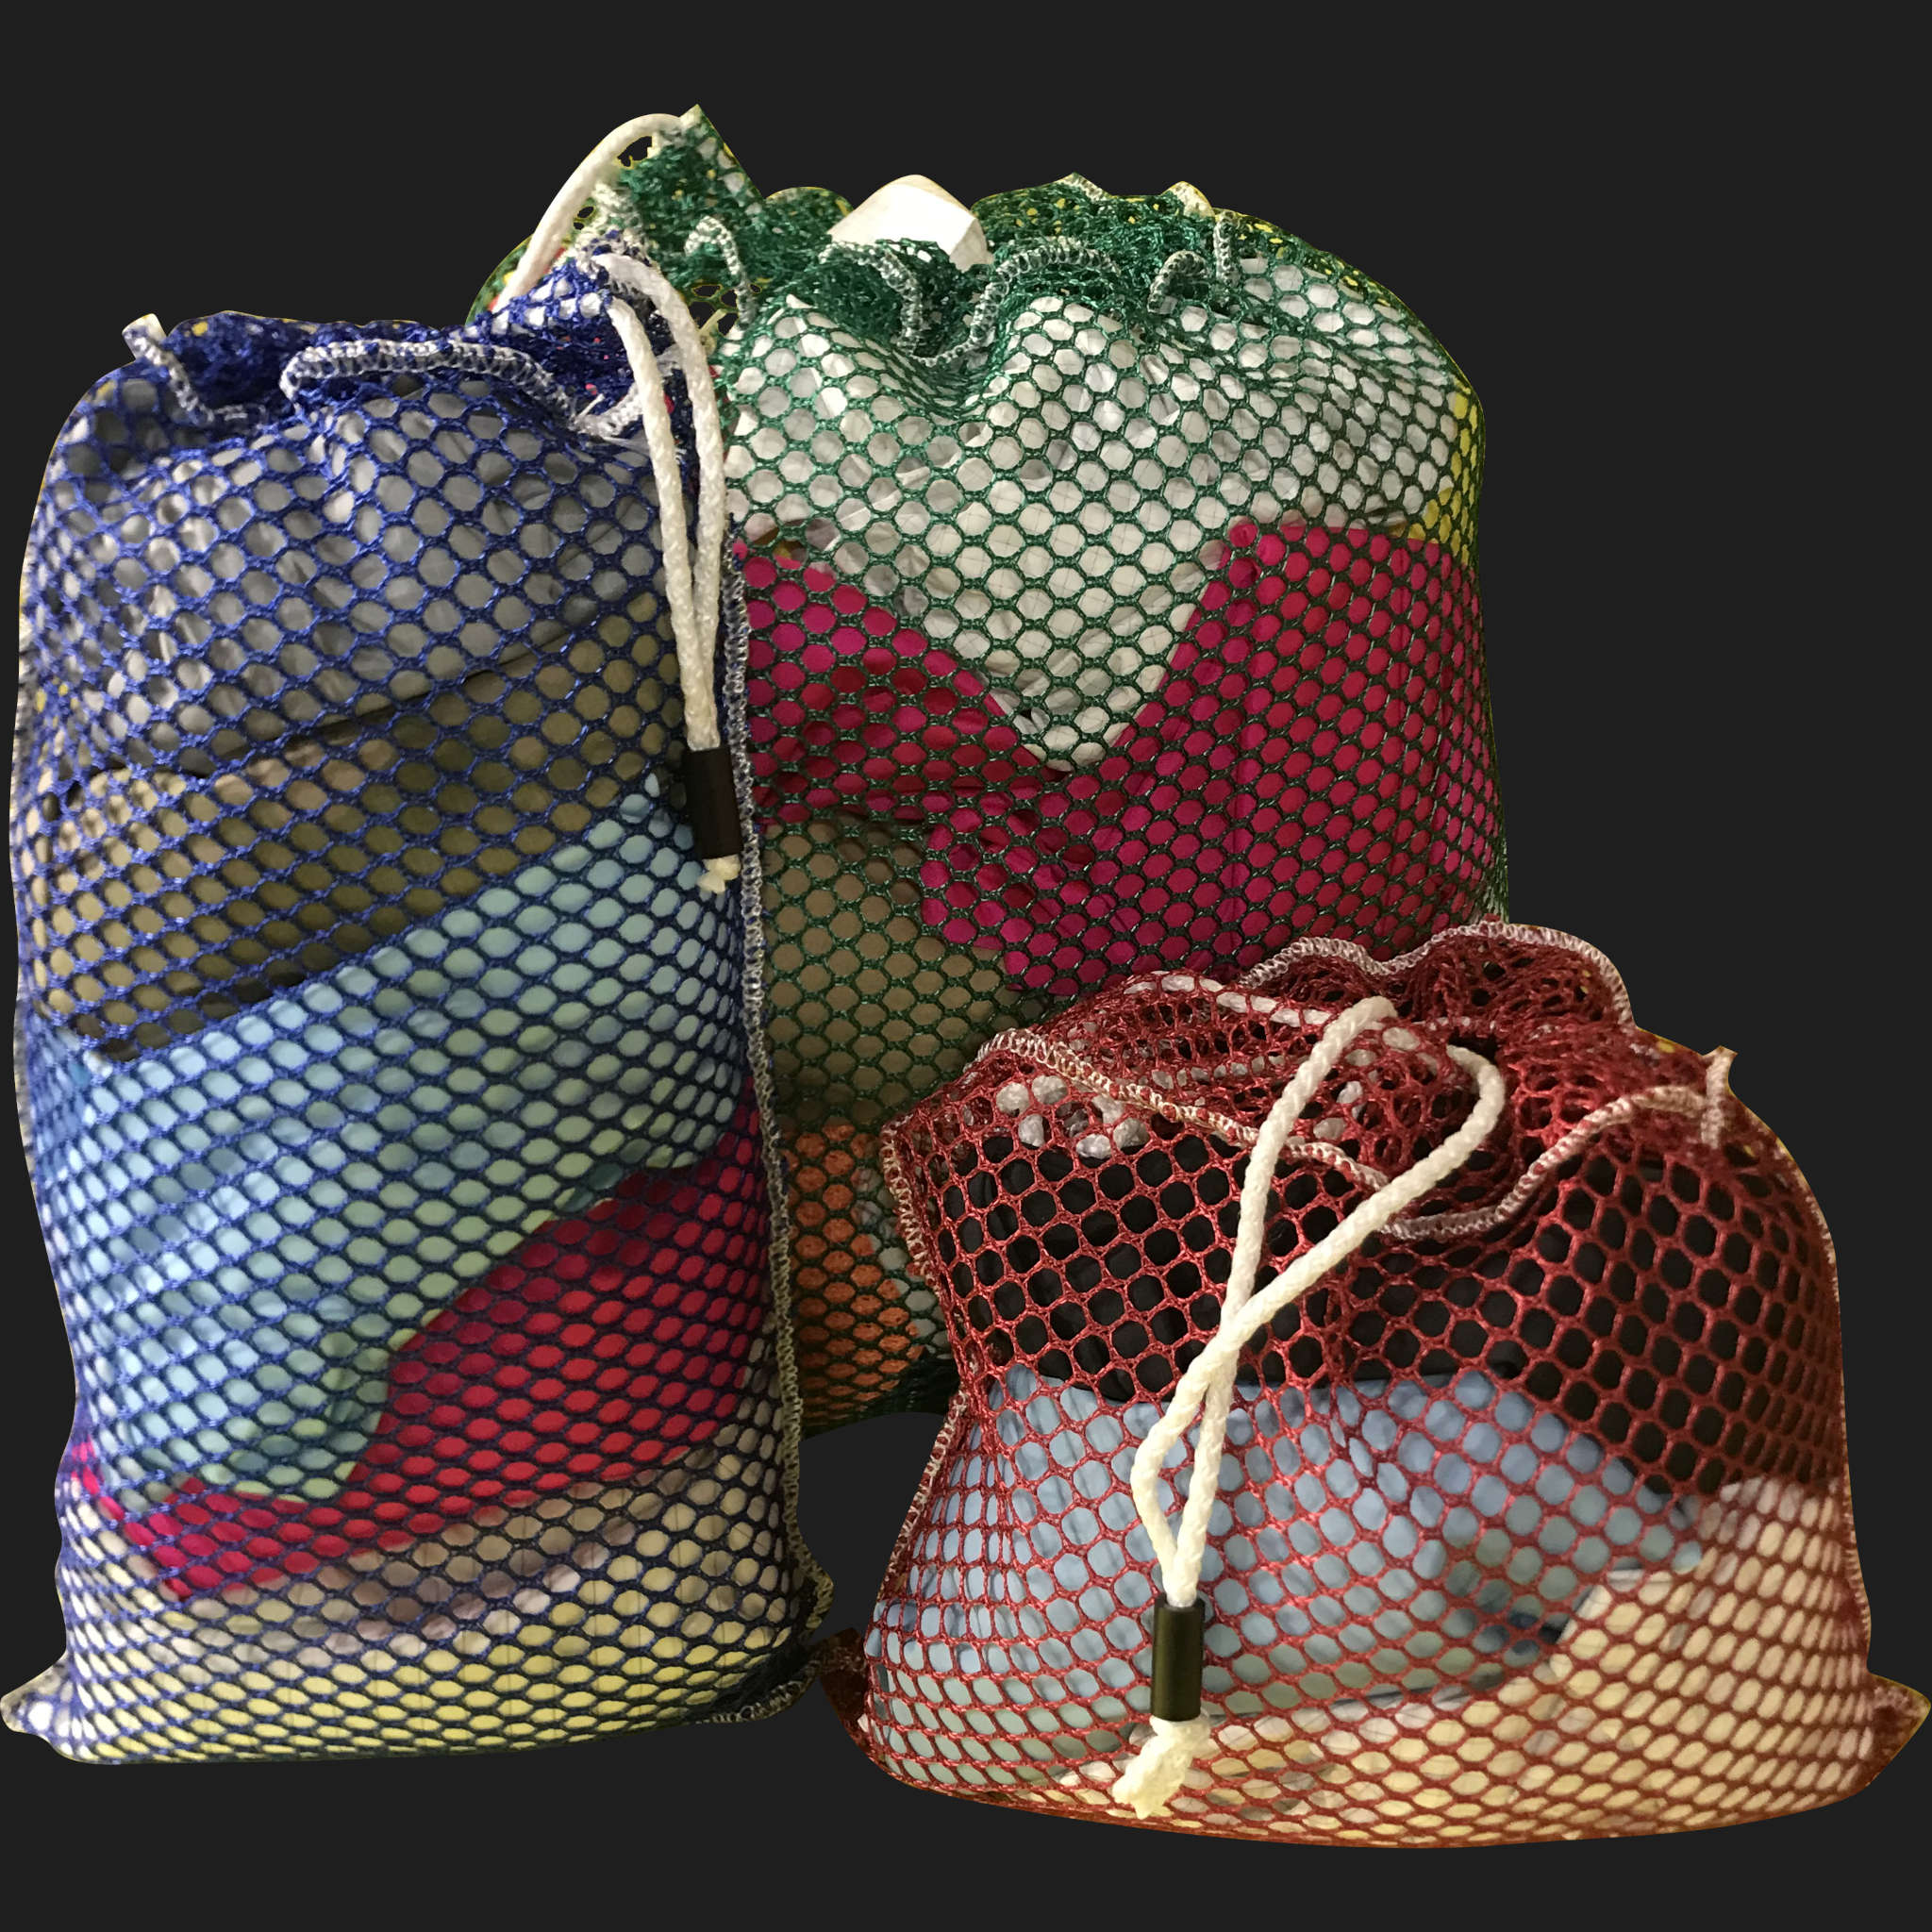 38" x 62" Customized Mesh-Net-Laundry Bags Heavy Duty with Cord and barrellock closure